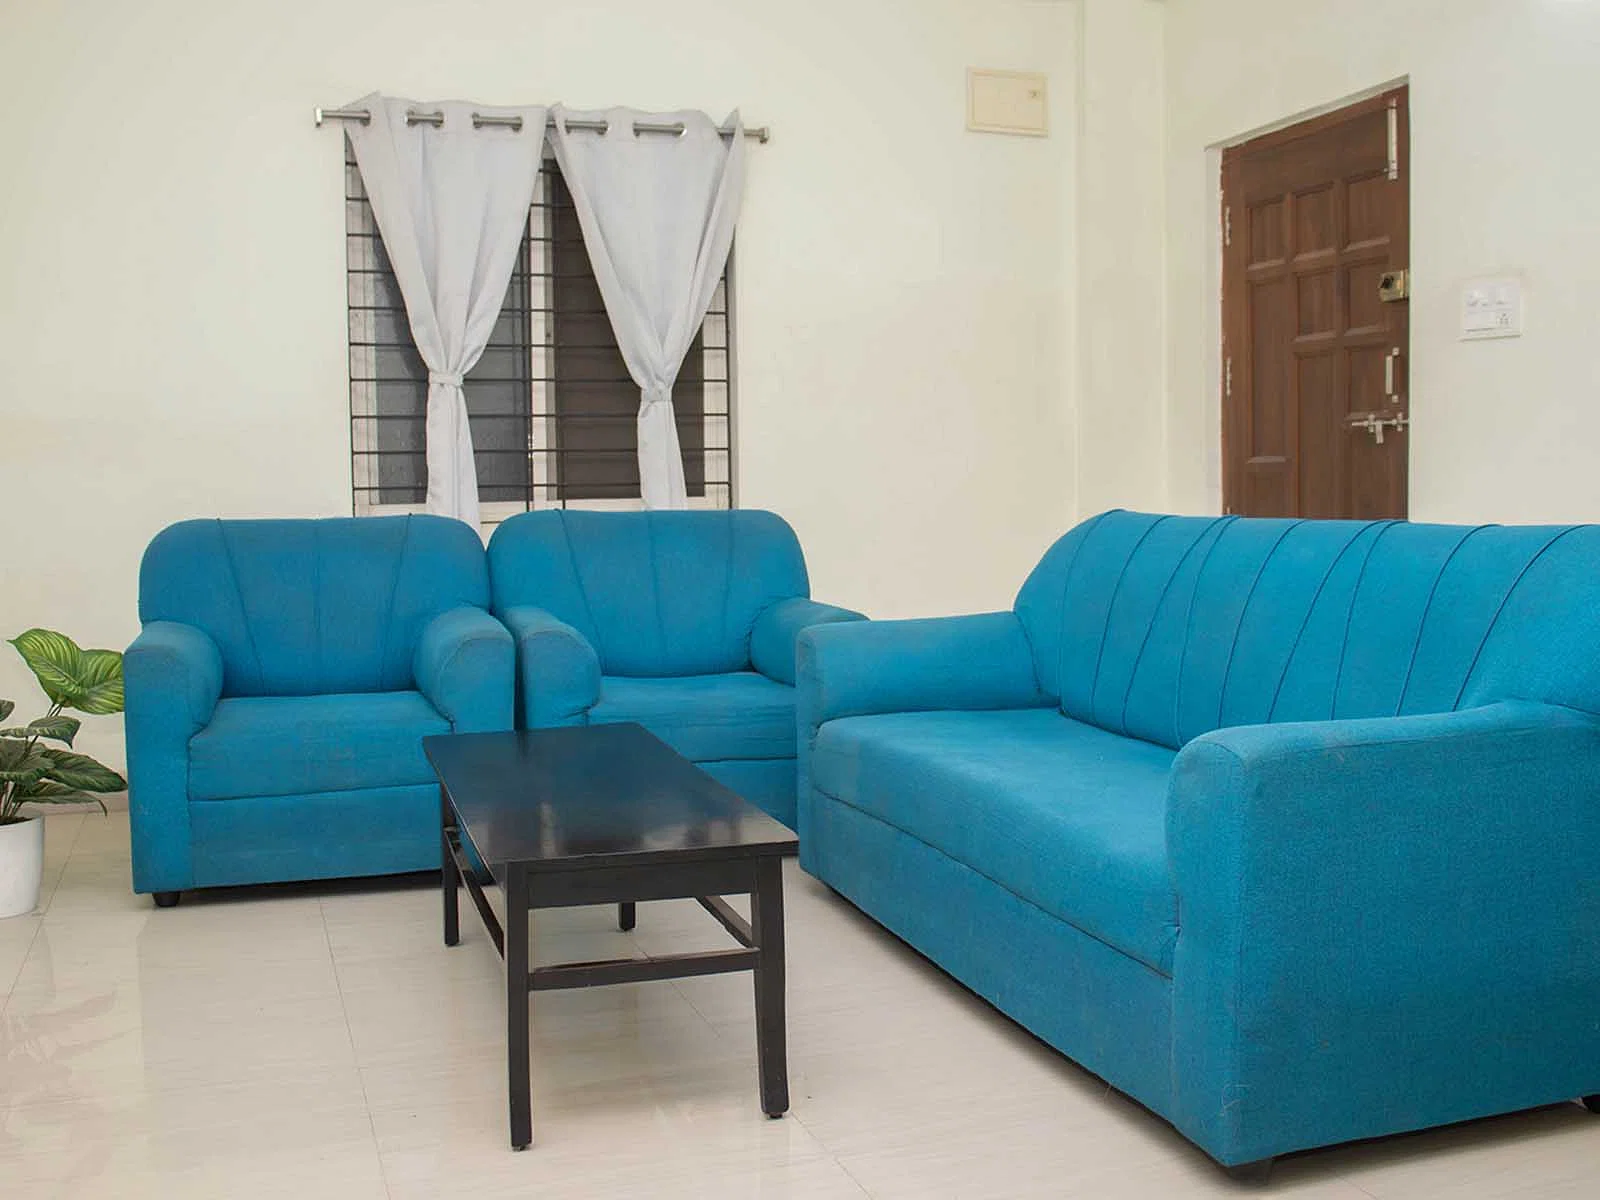 Affordable single rooms for students and working professionals in KPHB-Hyderabad-Zolo Grit